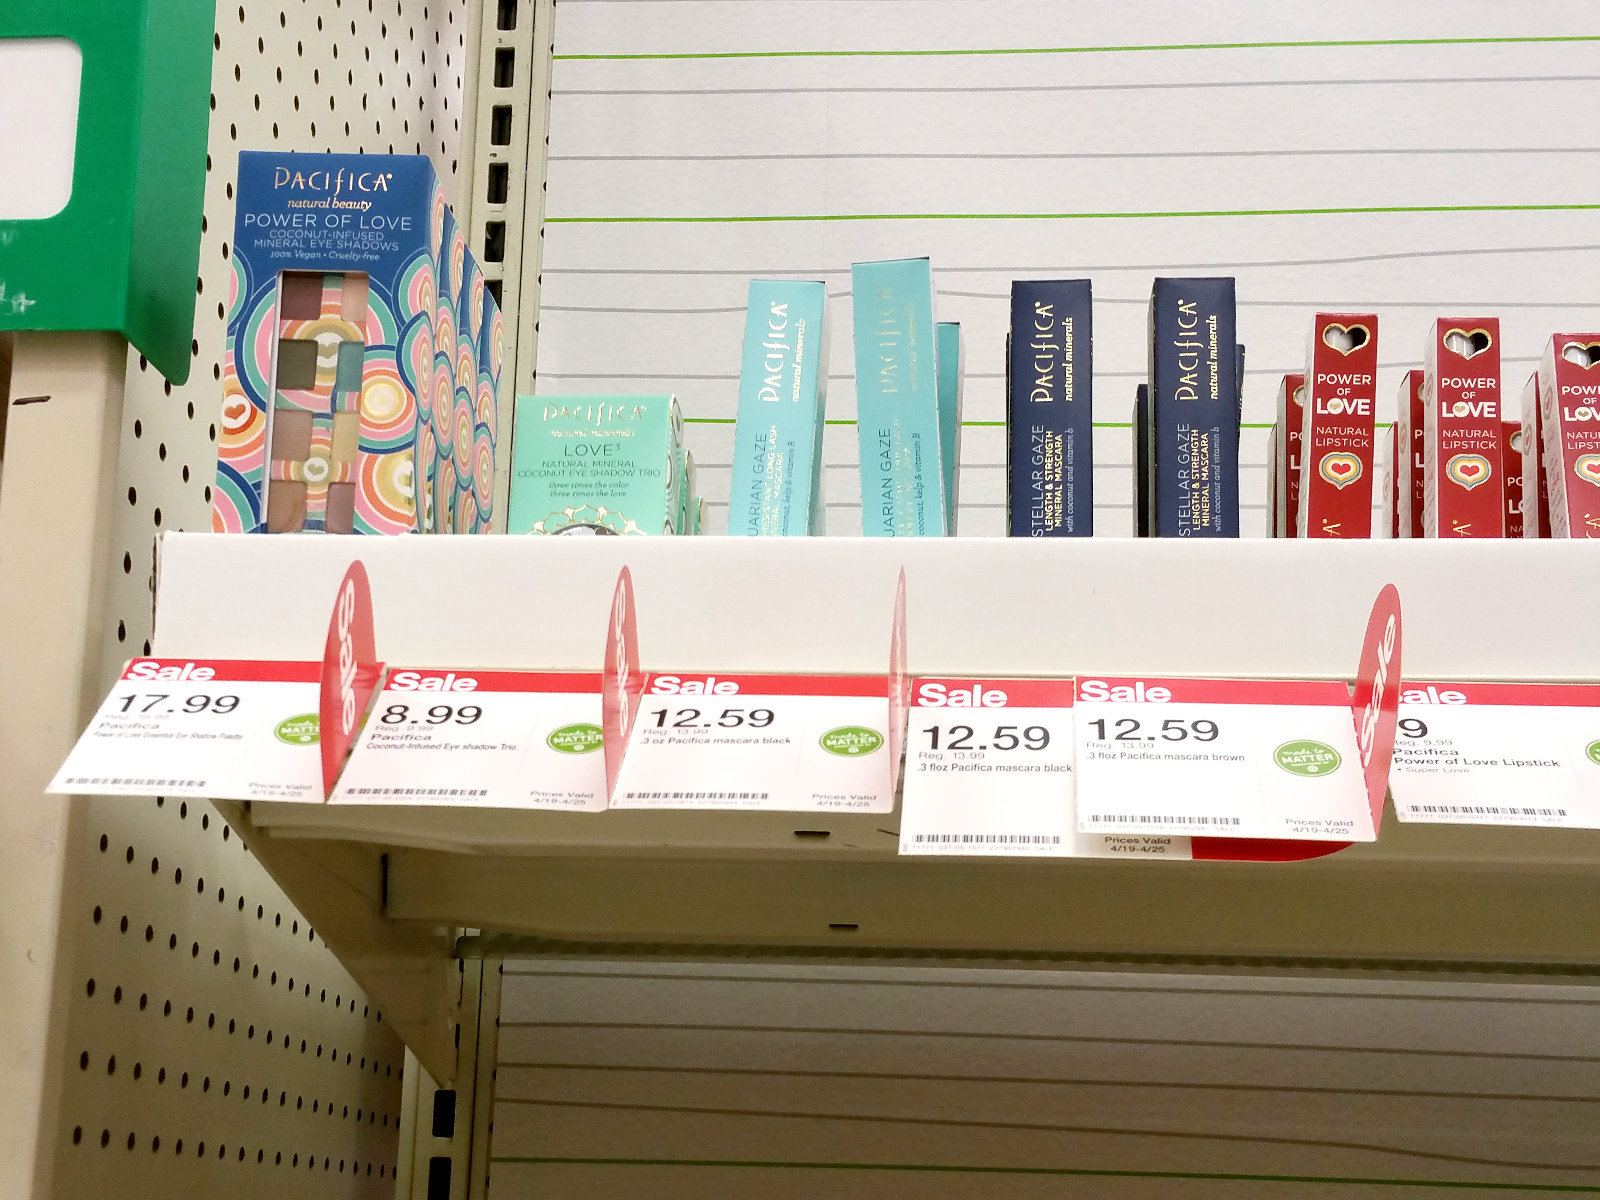 New Pacifica Power of Love Products on Sale at Target